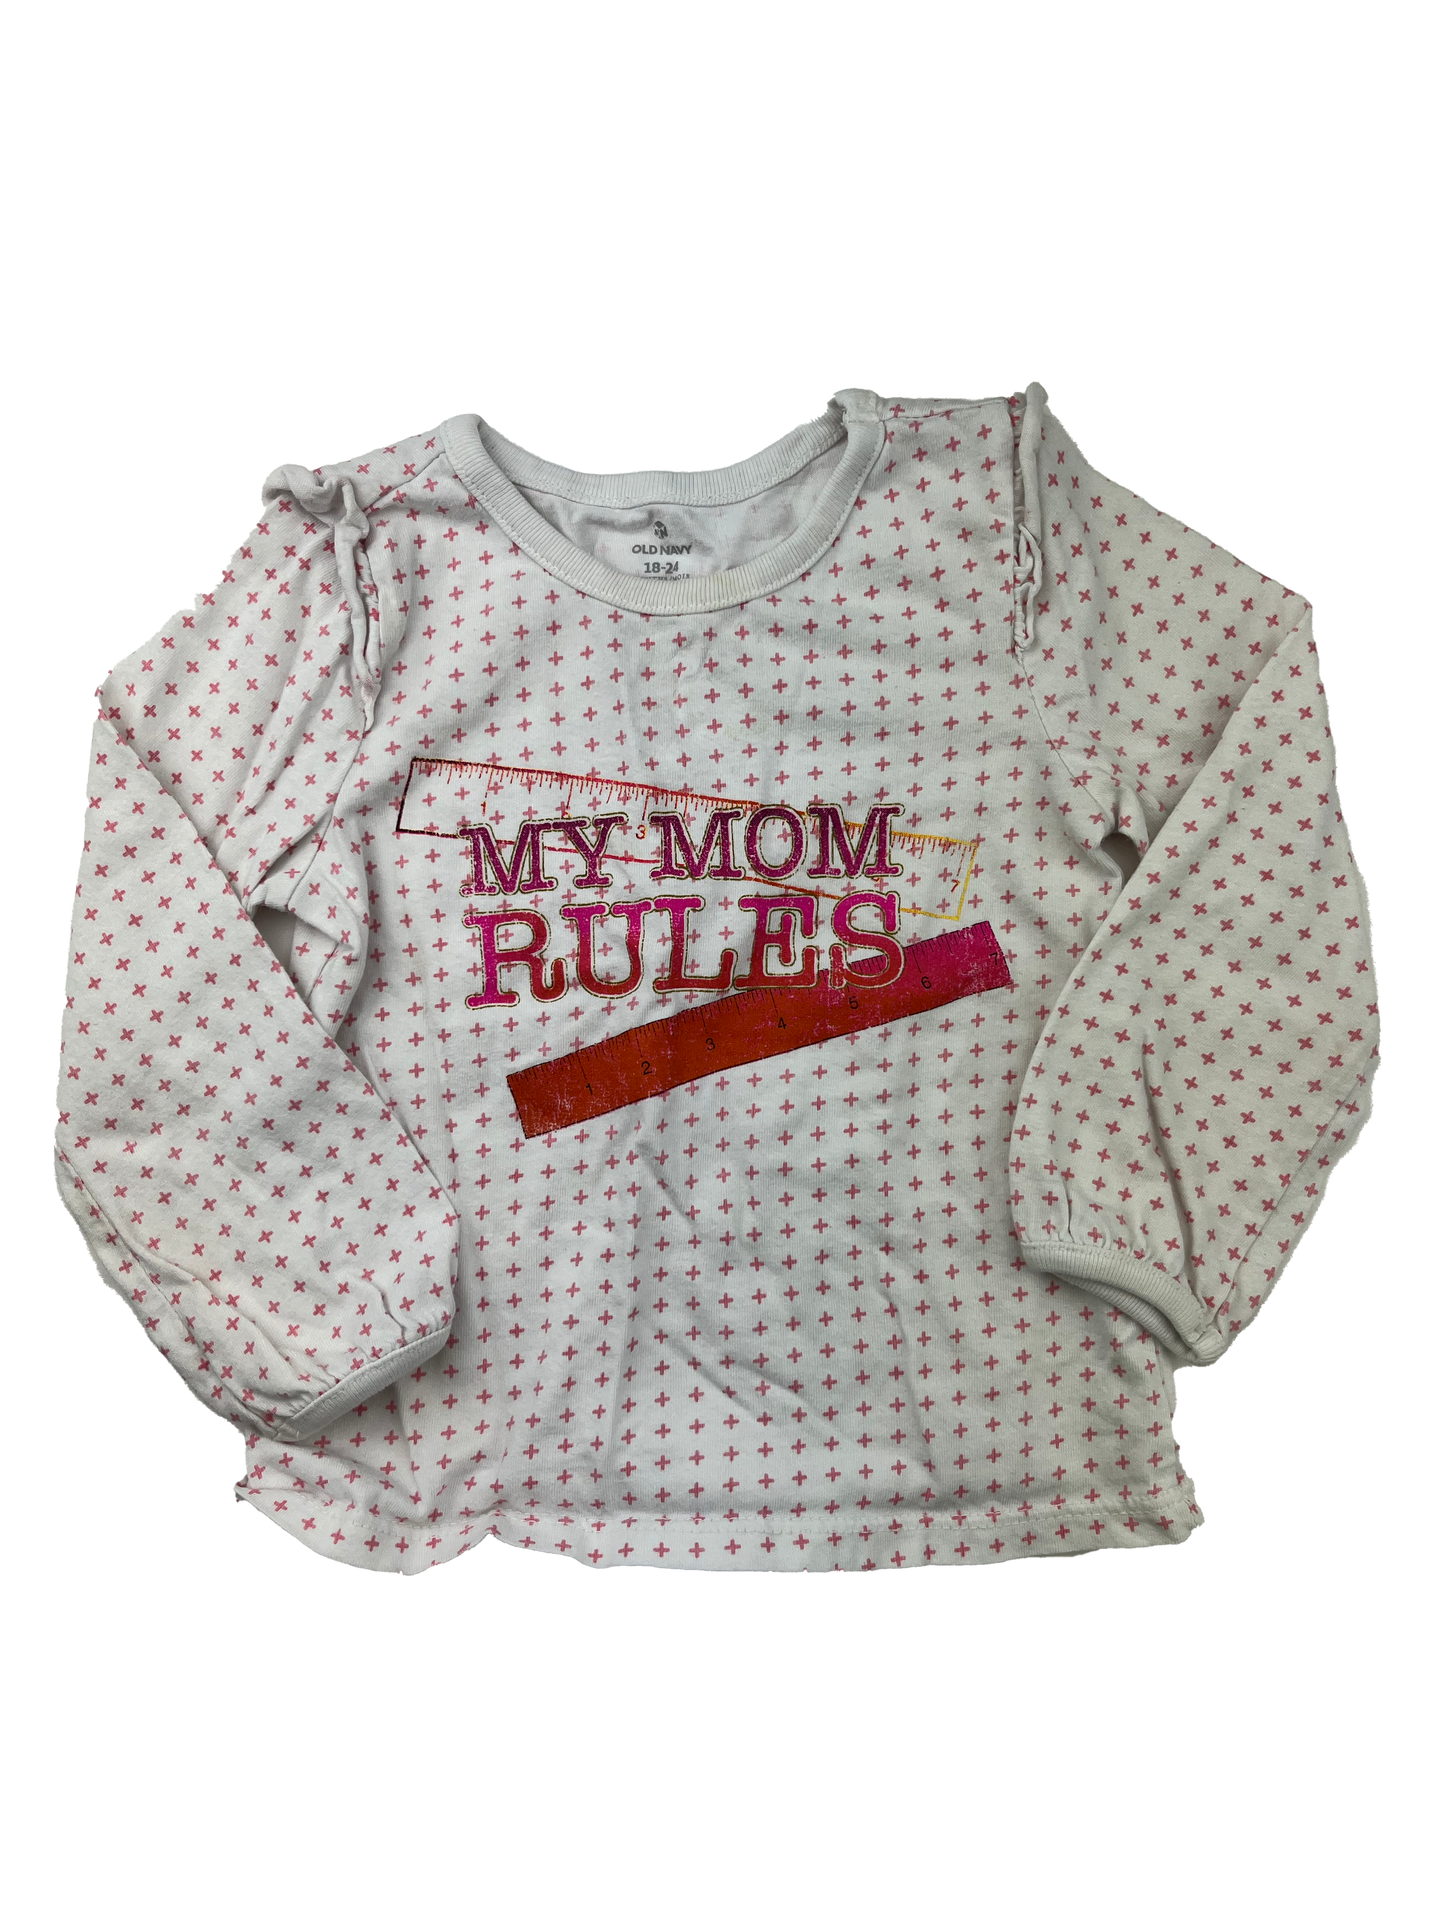 Old Navy White Long Sleeve Shirt "My Mom Rules" 18-24